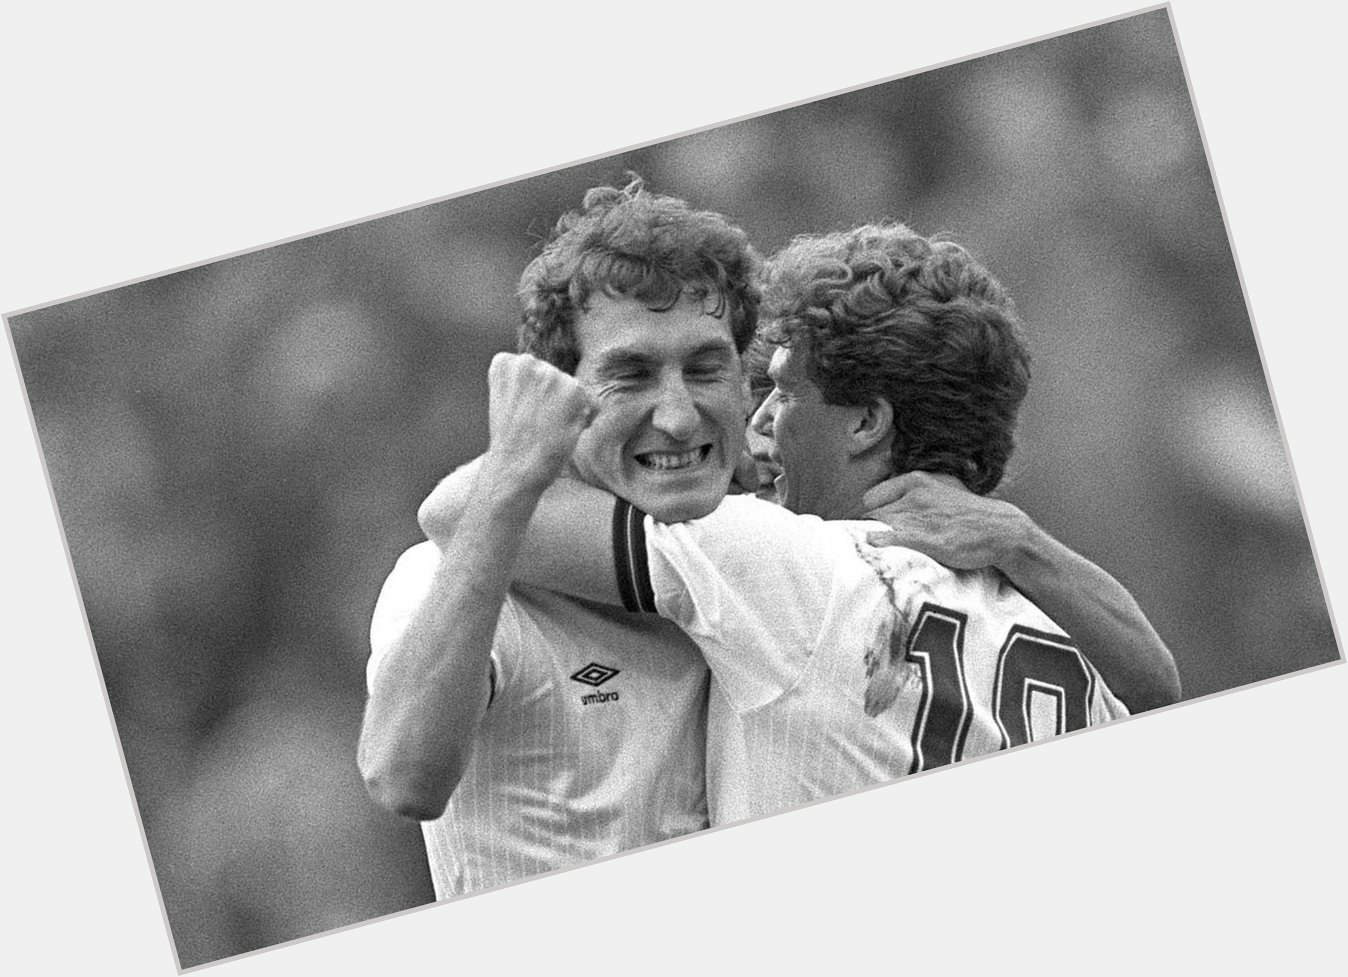 Happy 60th birthday to former captain Terry Butcher! 